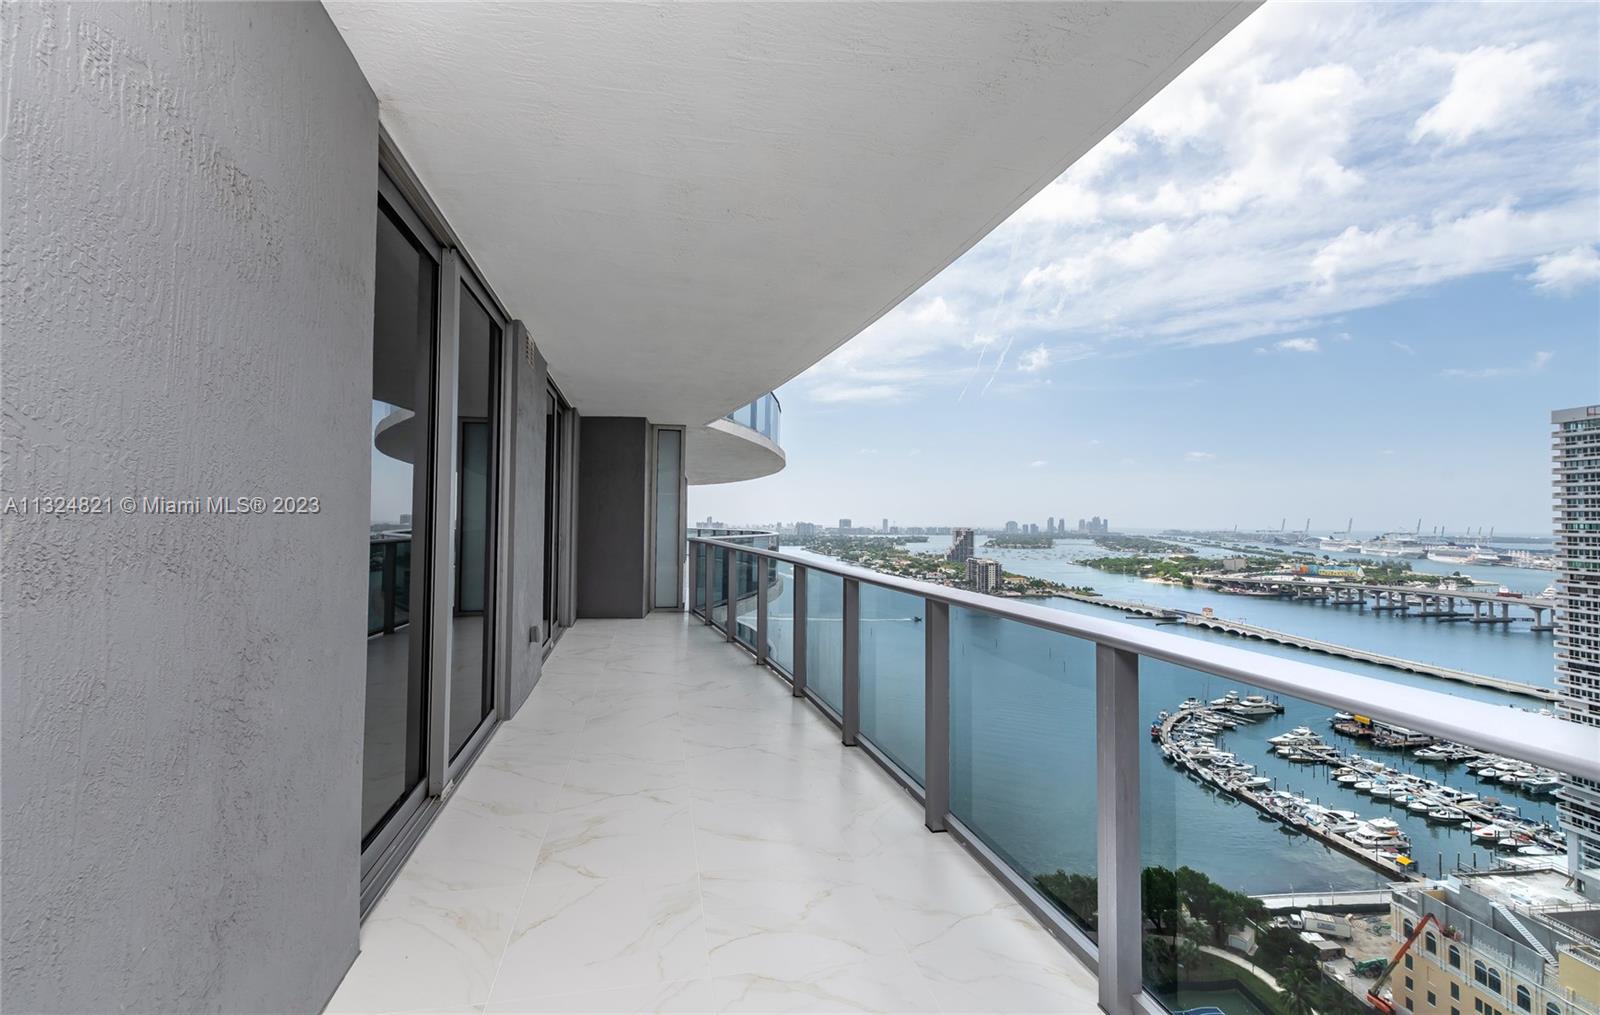 BRIGHT AND SUPER SPACIOUS 3 BED, 3 1/2 BATH UNIT WITH BREATHTAKING VIEWS TO BISCAYNE BAY AT LUXURIOUS AND SPECTACULAR ARIA ON THE BAY. PRIVATE ELEVATOR TO FOYER, FLOOR TO CEILING WINDOWS, BEAUTIFUL AND ELEGANT CALACATTA WHITE POLISHED TILE FLOORING, EUROPEAN CABINETRY KITCHEN WITH BOSCH APPLIANCES. GRANITE COUNTER-TOPS. AMENITIES INCLUDE 2 CURVED SUNRISE AND SUNSET POOLS, JACUZZI OVERLOOKING BAY, INDOOR/OUTDOOR SOCIAL ROOM, EXPANSIVE SUN DECK, BUSINESS CENTER, STATE-OF-THE-ART GYM AND YOGA STUDIO, OUTDOOR FIRE PIT, BBQ, GREAT ROOM, , GAME ROOM AND LIBRARY, TEEN LOUNGE AND KIDS PLAYROOM. CLOSE TO DOWNTOWN, MIAMI BEACH, FINANCIAL DISTRICT BRICKELL AND MUCH MORE! QUICK ACCESS TO MAJOR HIGHWAYS.  The unit has tenant showings that must be requested within 24 hours.